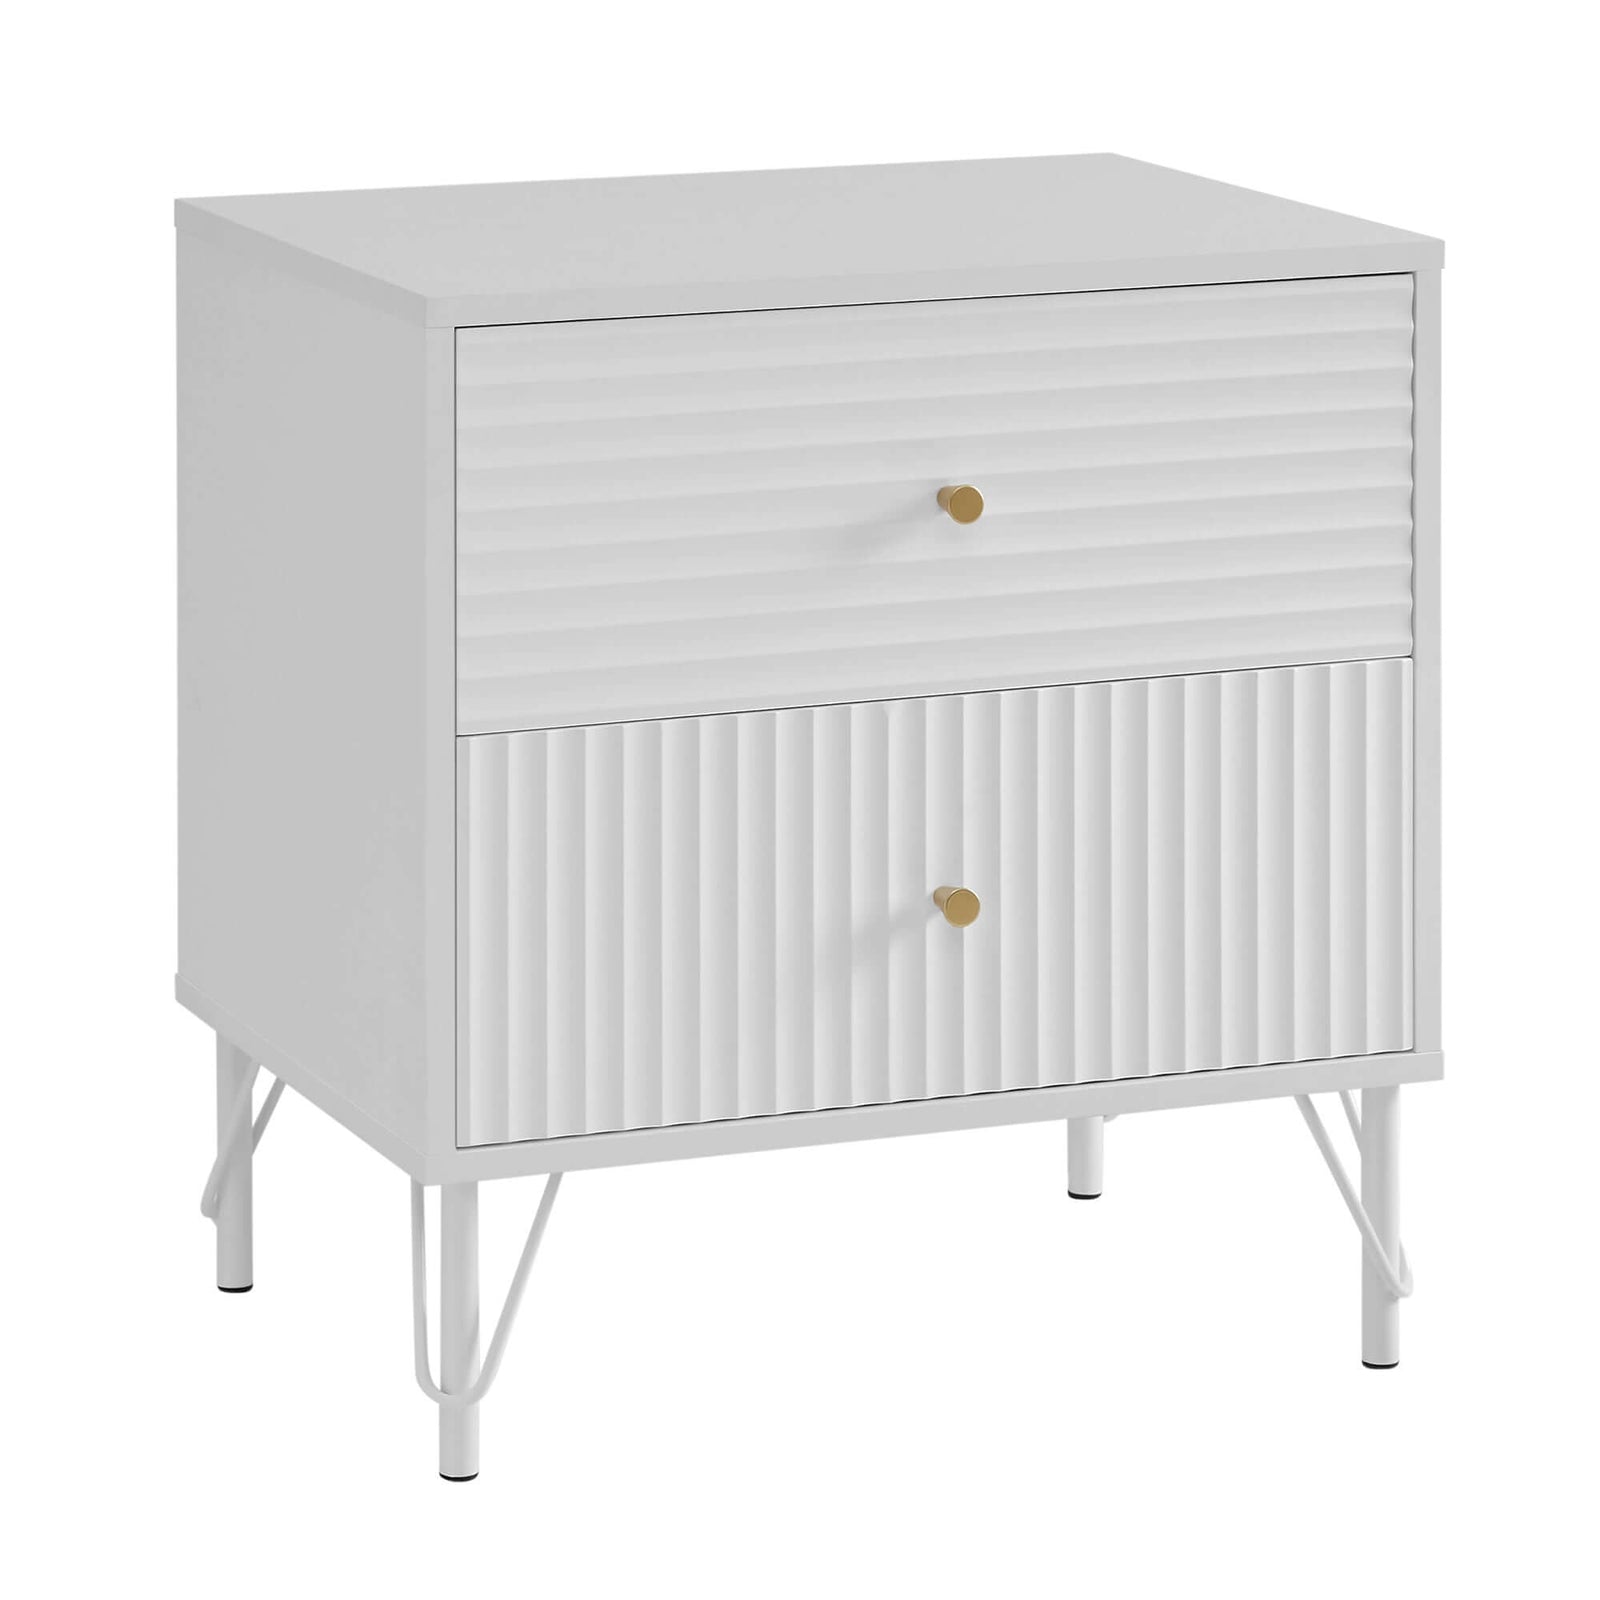 Lisa Wavy Fluted Bedside Table in White-Upinteriors